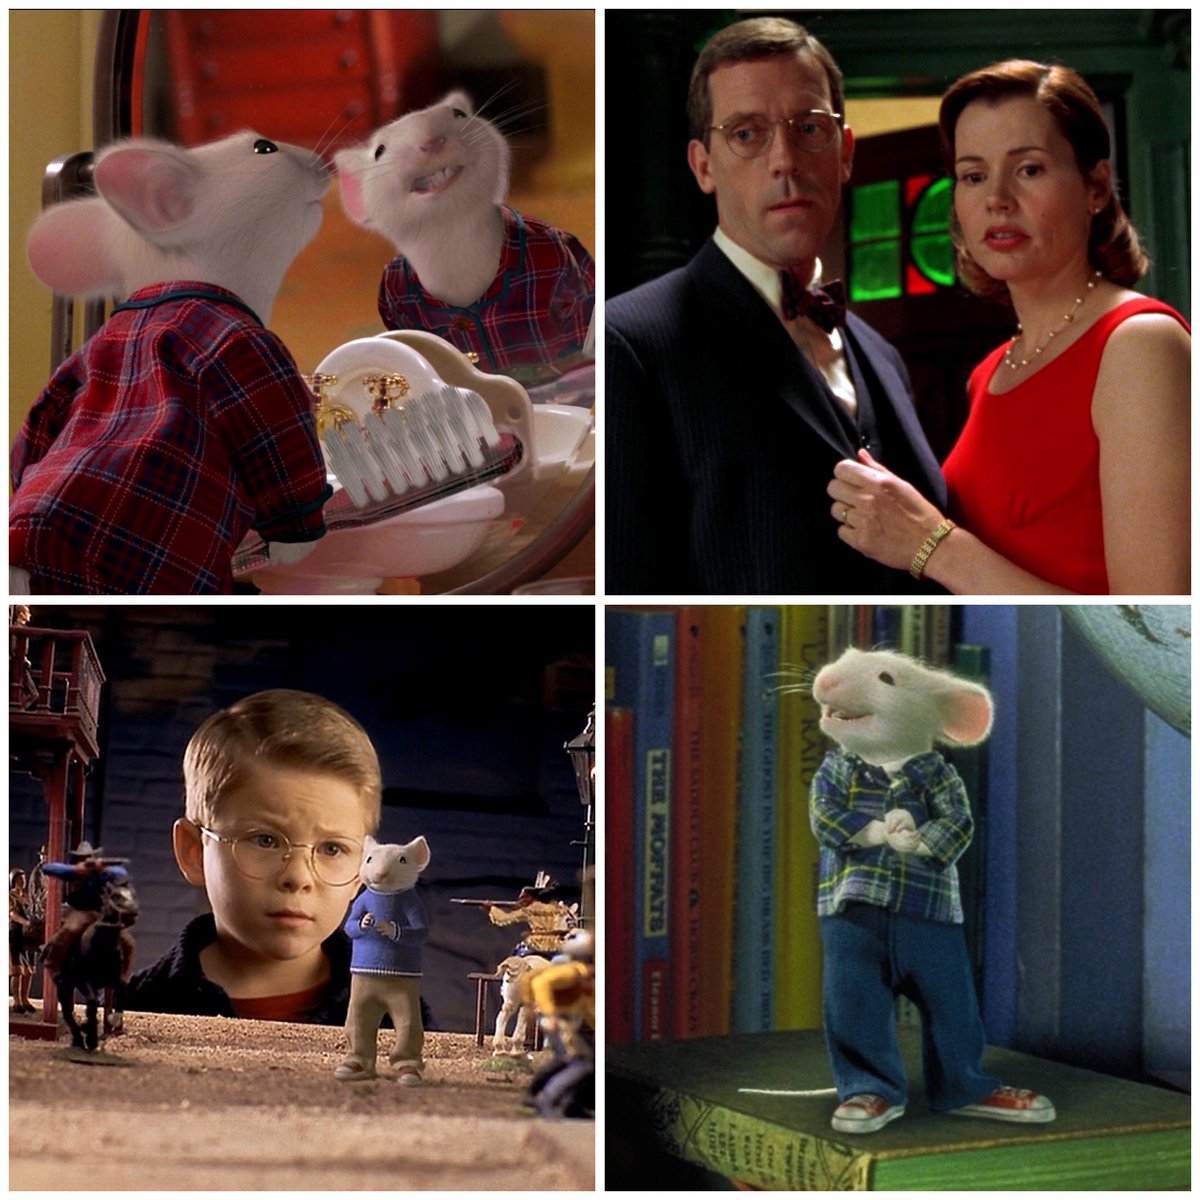 December 17, 1999: On this day in film history, 𝐒𝐓𝐔𝐀𝐑𝐓 𝐋𝐈𝐓𝐓𝐋𝐄 was released. 

#StuartLittle